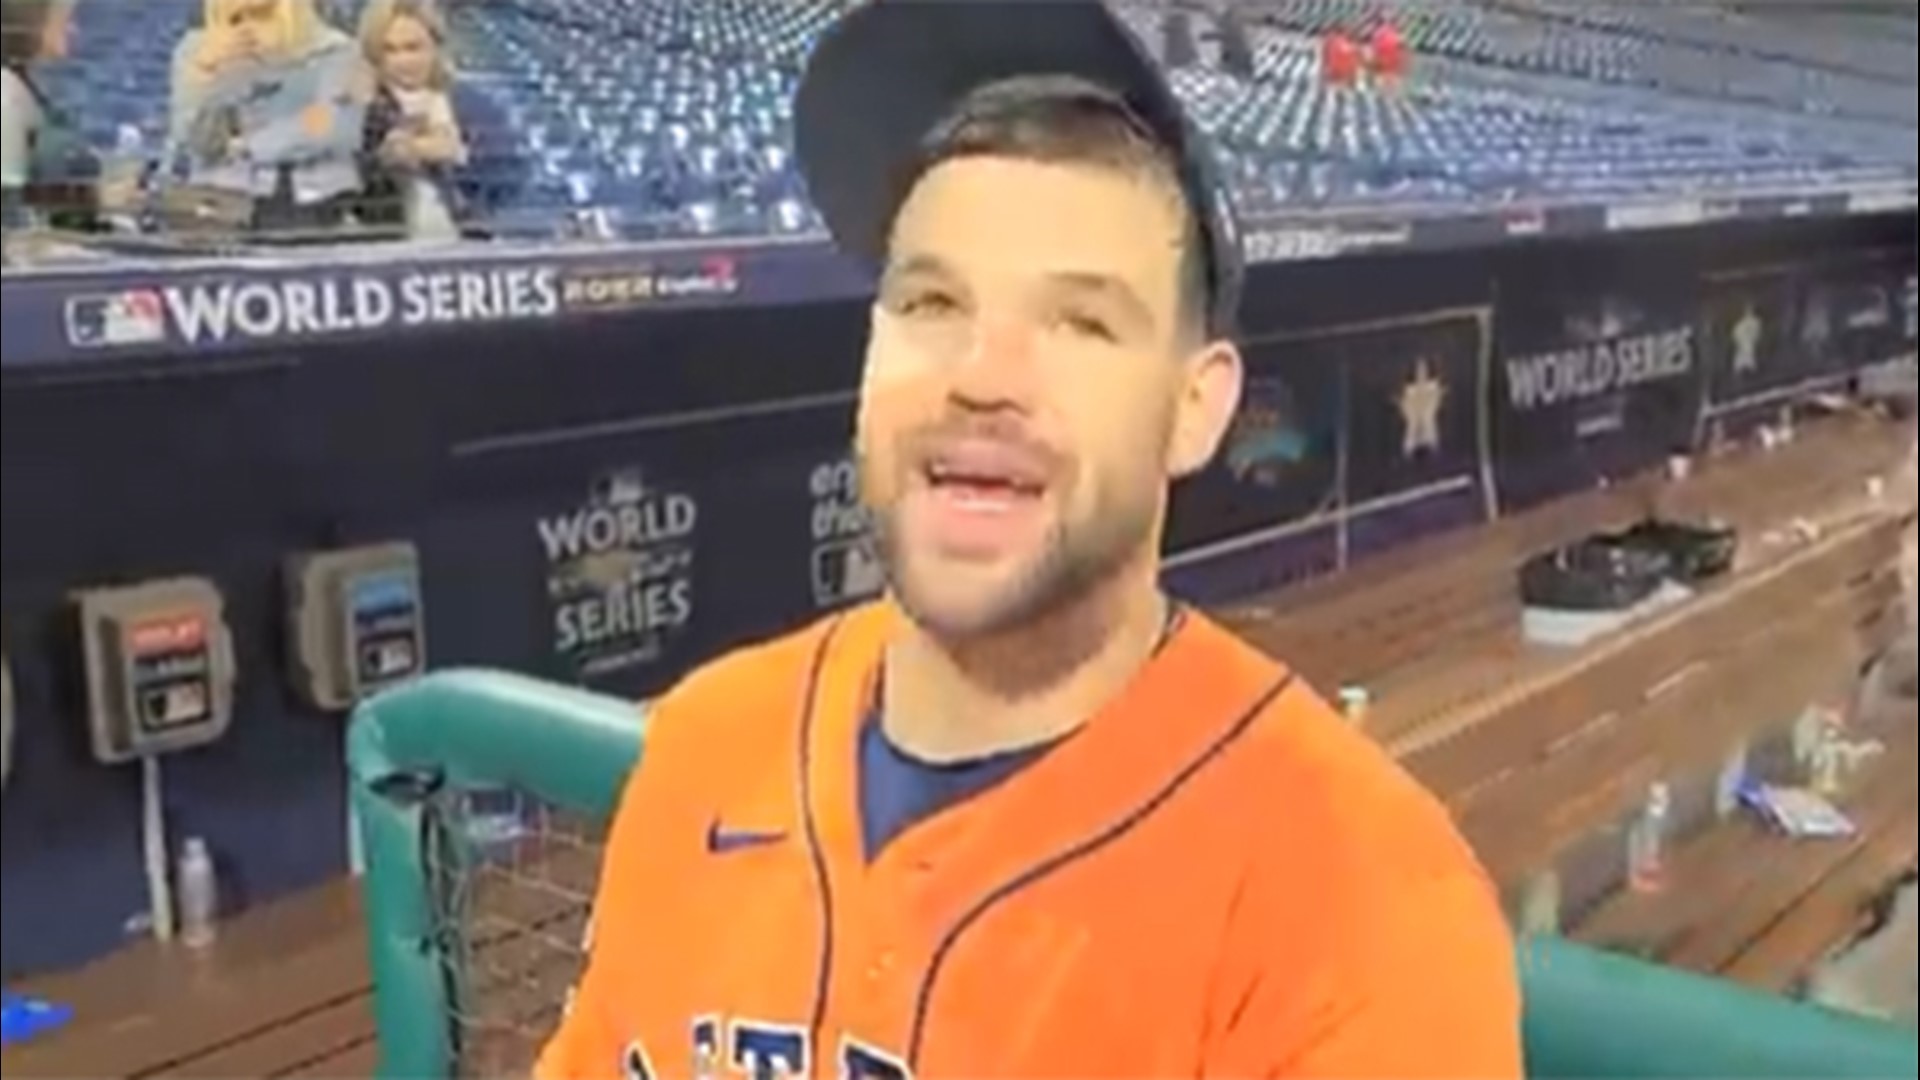 The Astros' Chas McCormick talked to Chas McCormick on the field after the Astros beat Philadelphia.